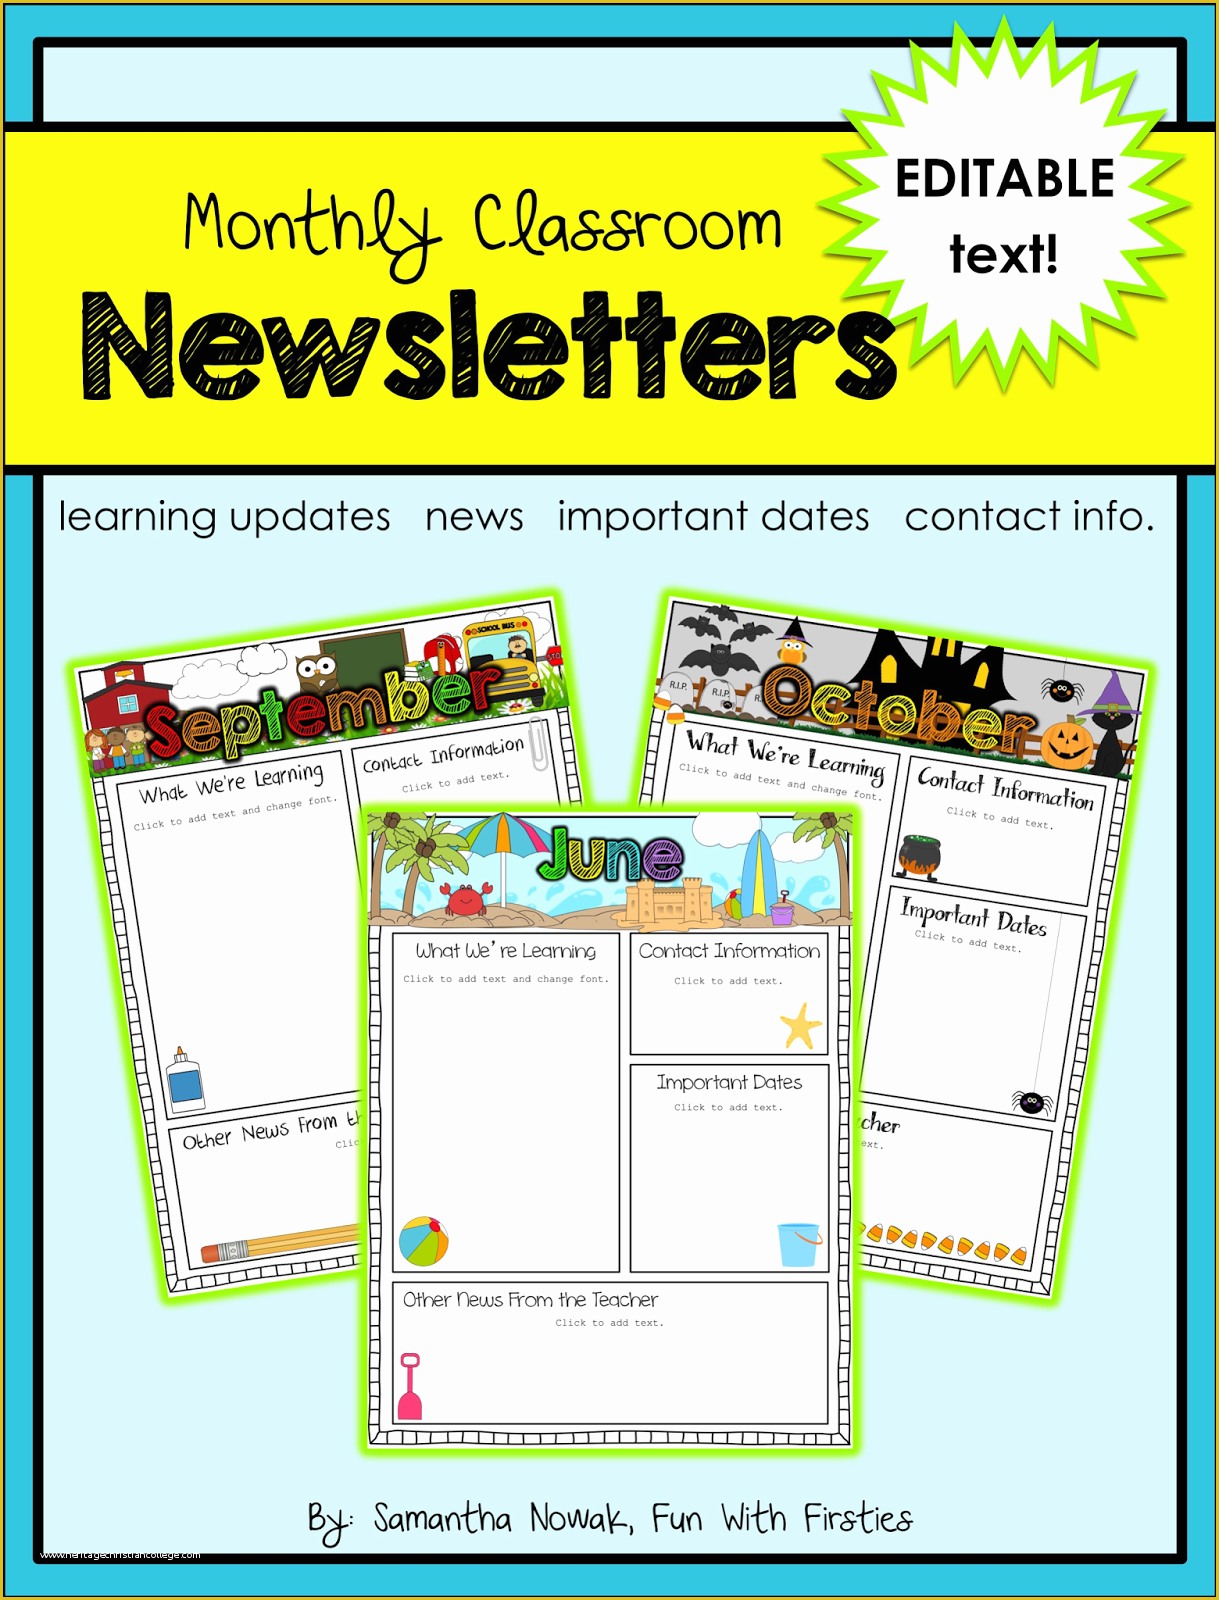 Free School Newsletter Templates Of Fun with Firsties Best Of Back to School